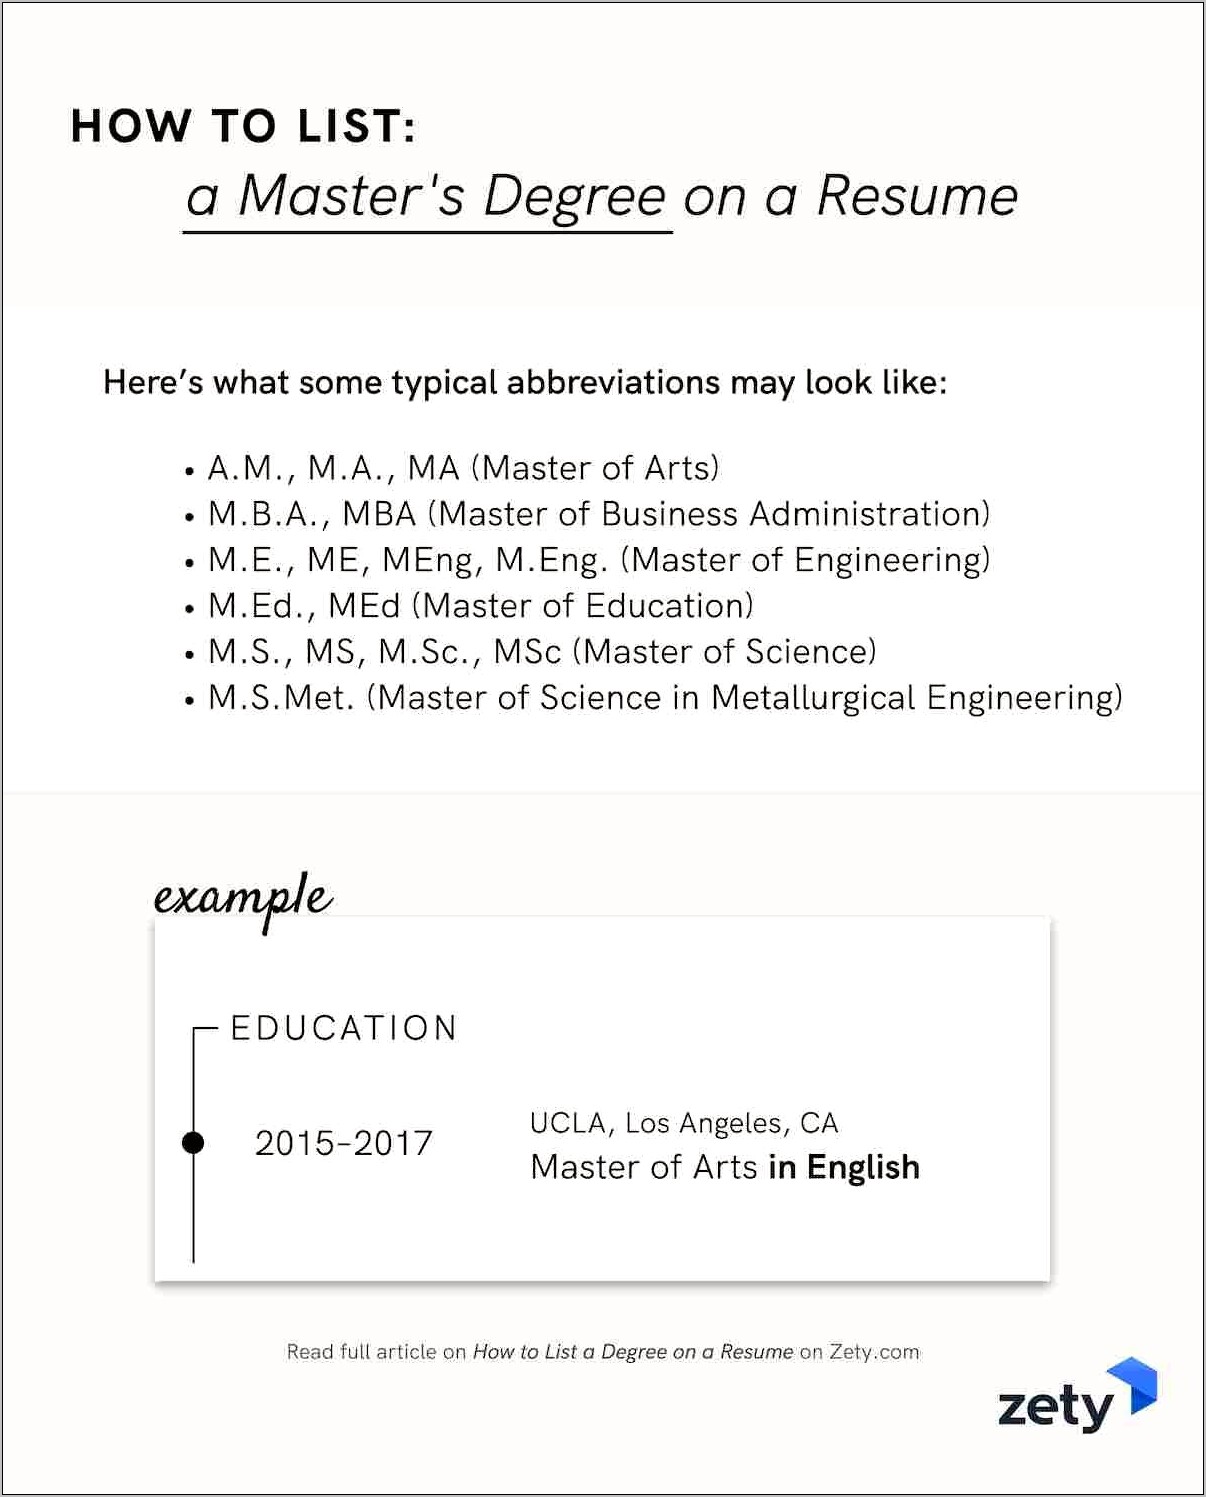 Can You Put Honors Under Education In Resume